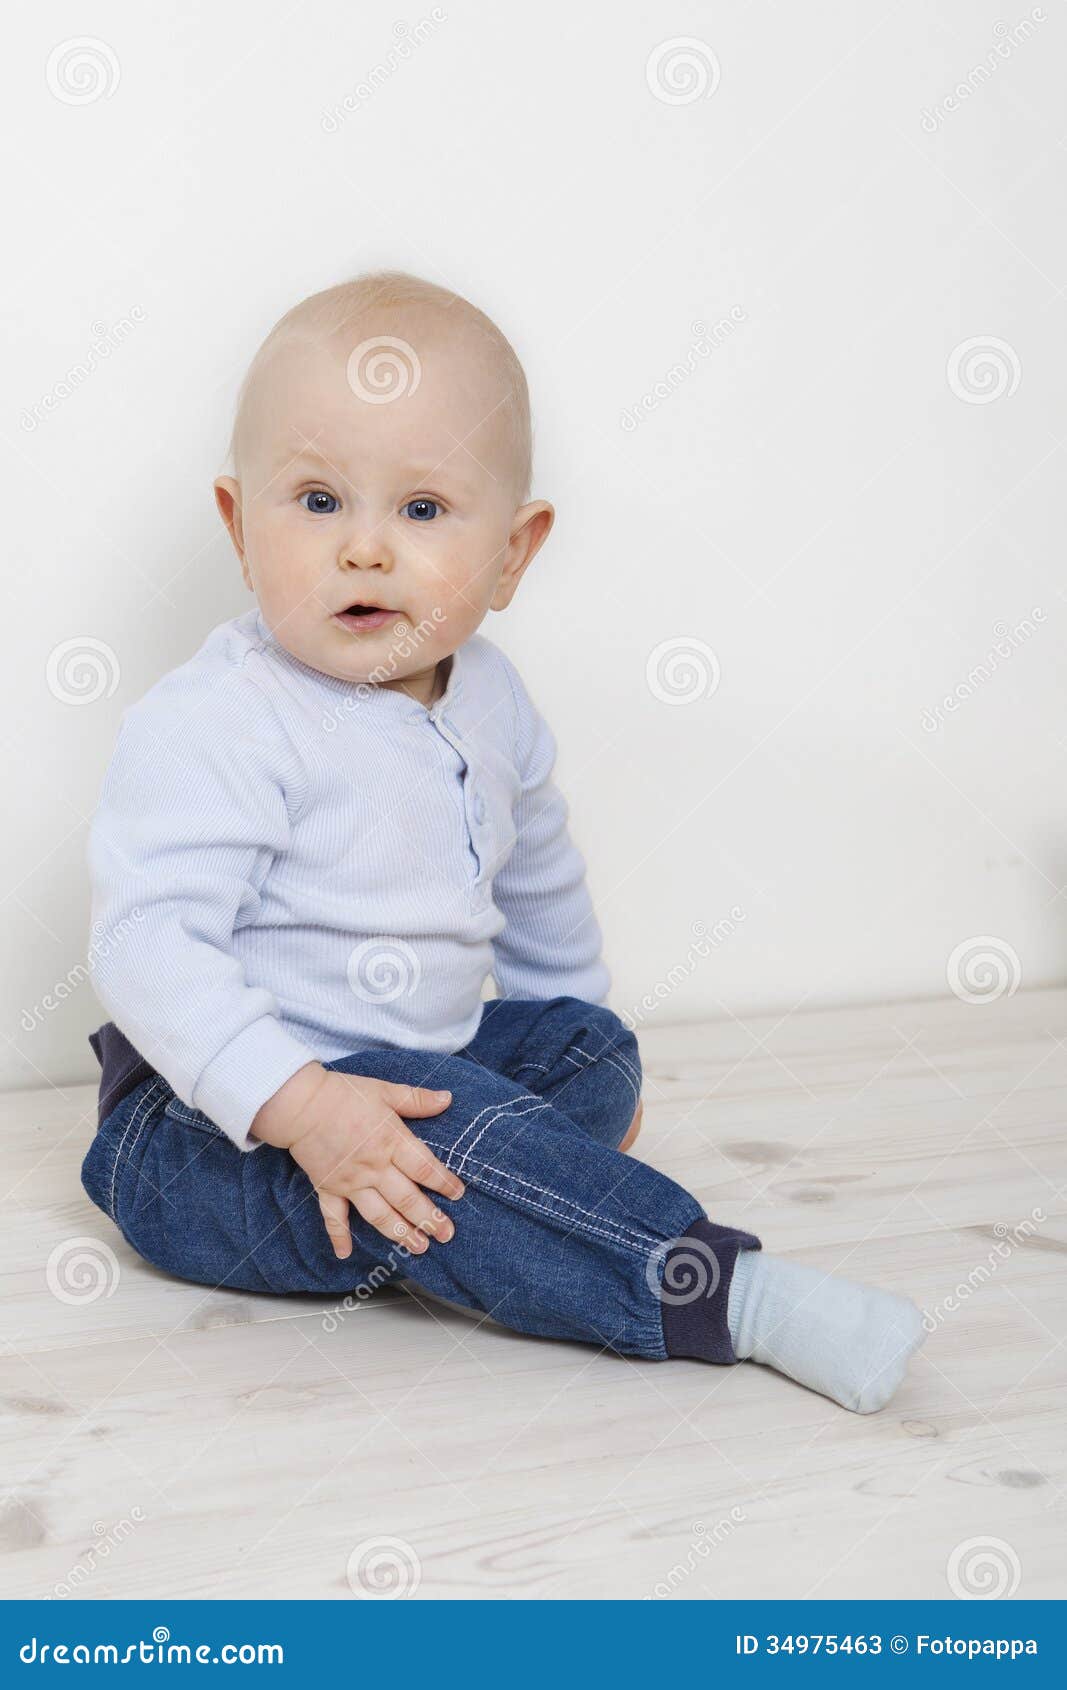 Baby Wondering stock image. Image of vertical, baby, jeans - 34975463